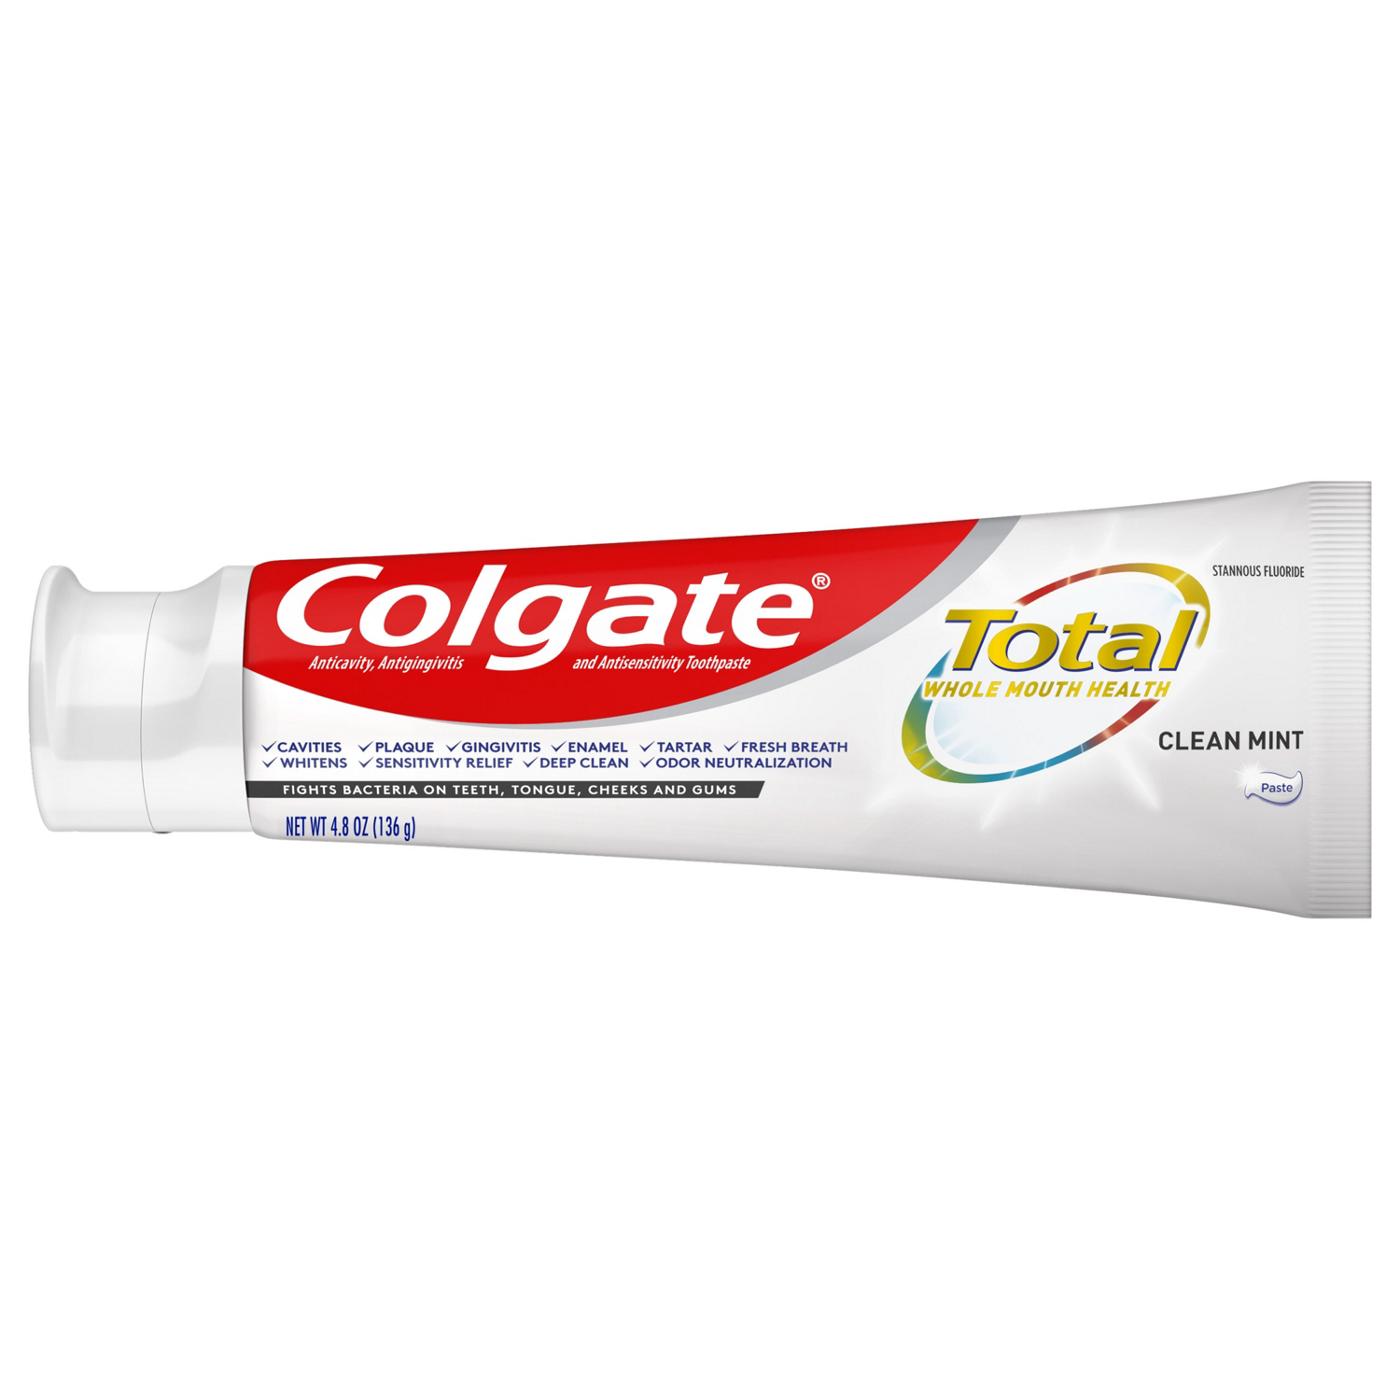 Colgate Total Toothpaste - Clean Mint, 2 Pk; image 15 of 18